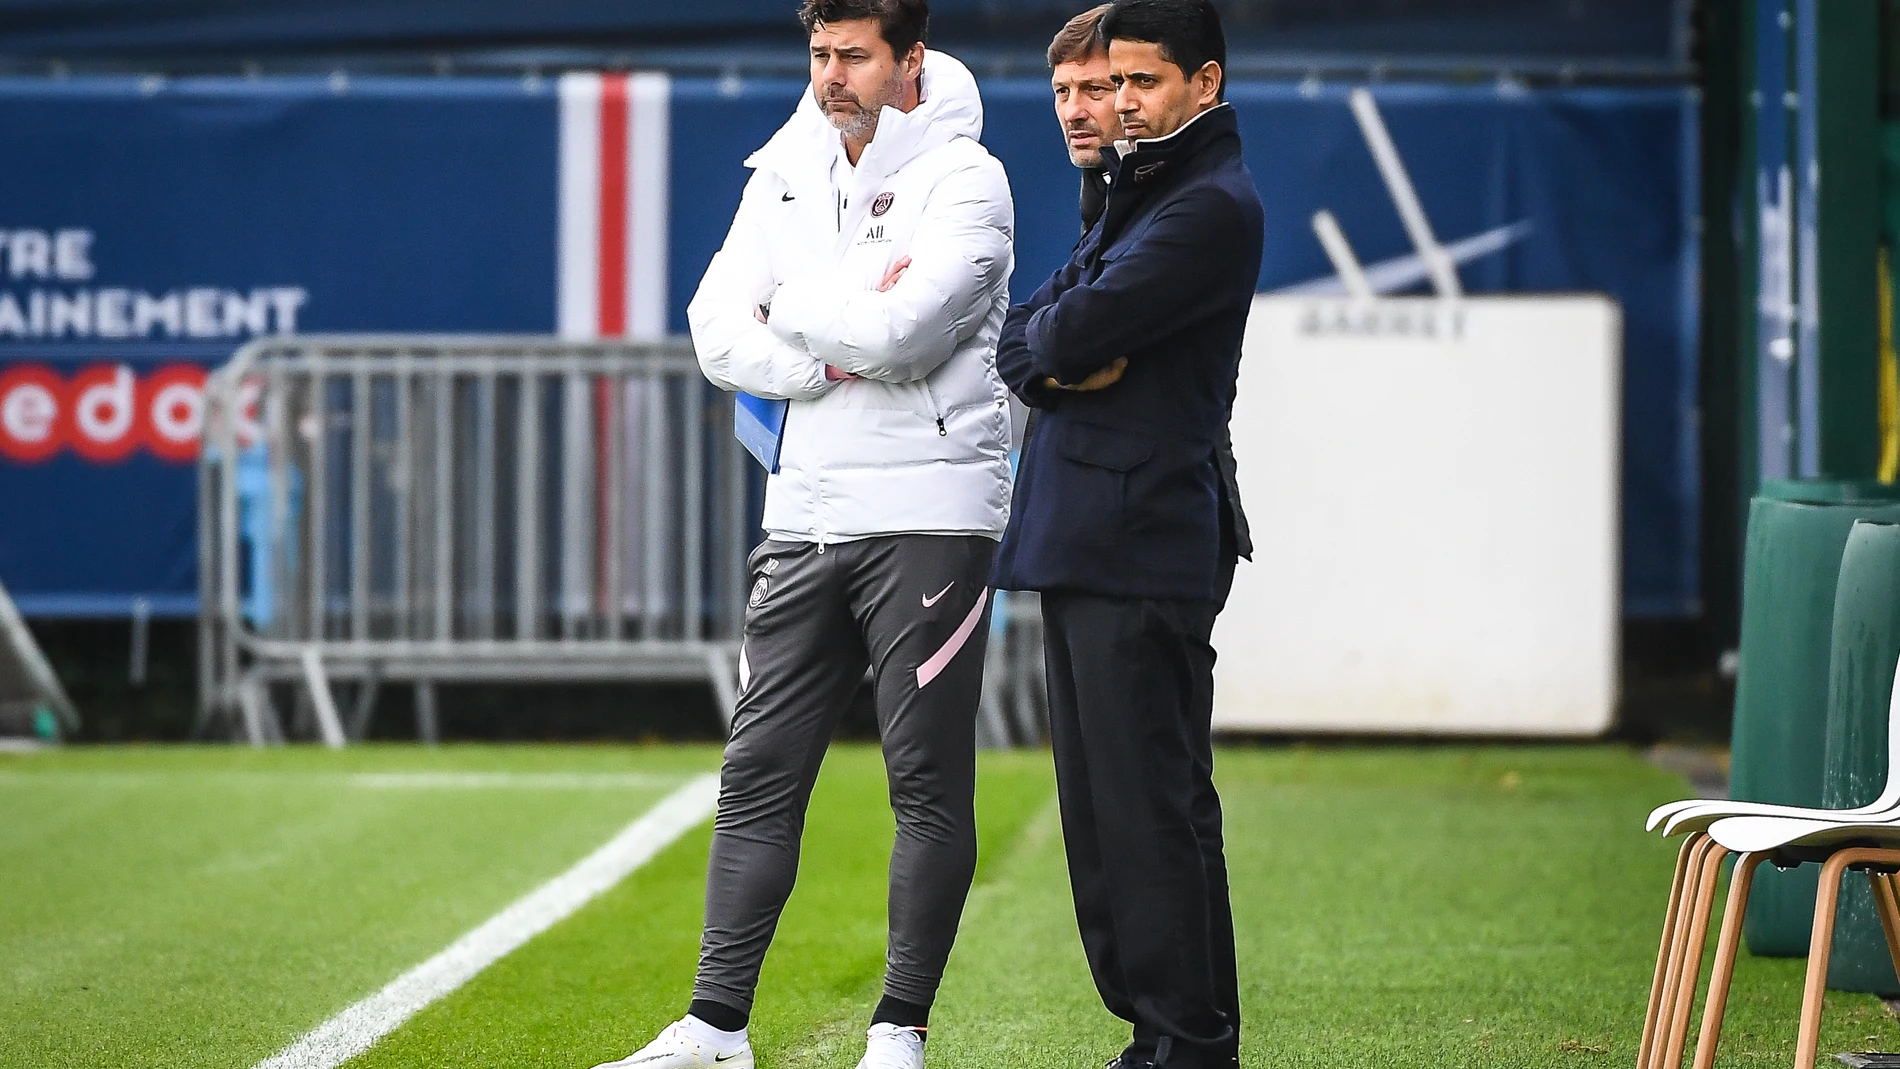 Mauricio POCHETTINO of PSG, Nasser AL-KHELAIFI of PSG and Leonardo of PSG during the training of the Paris Saint-Germain team on October 18, 2021 at Camp des Loges in Saint-Germain-en-Laye, France - Photo Matthieu Mirville / DPPIAFP7 18/10/2021 ONLY FOR USE IN SPAIN